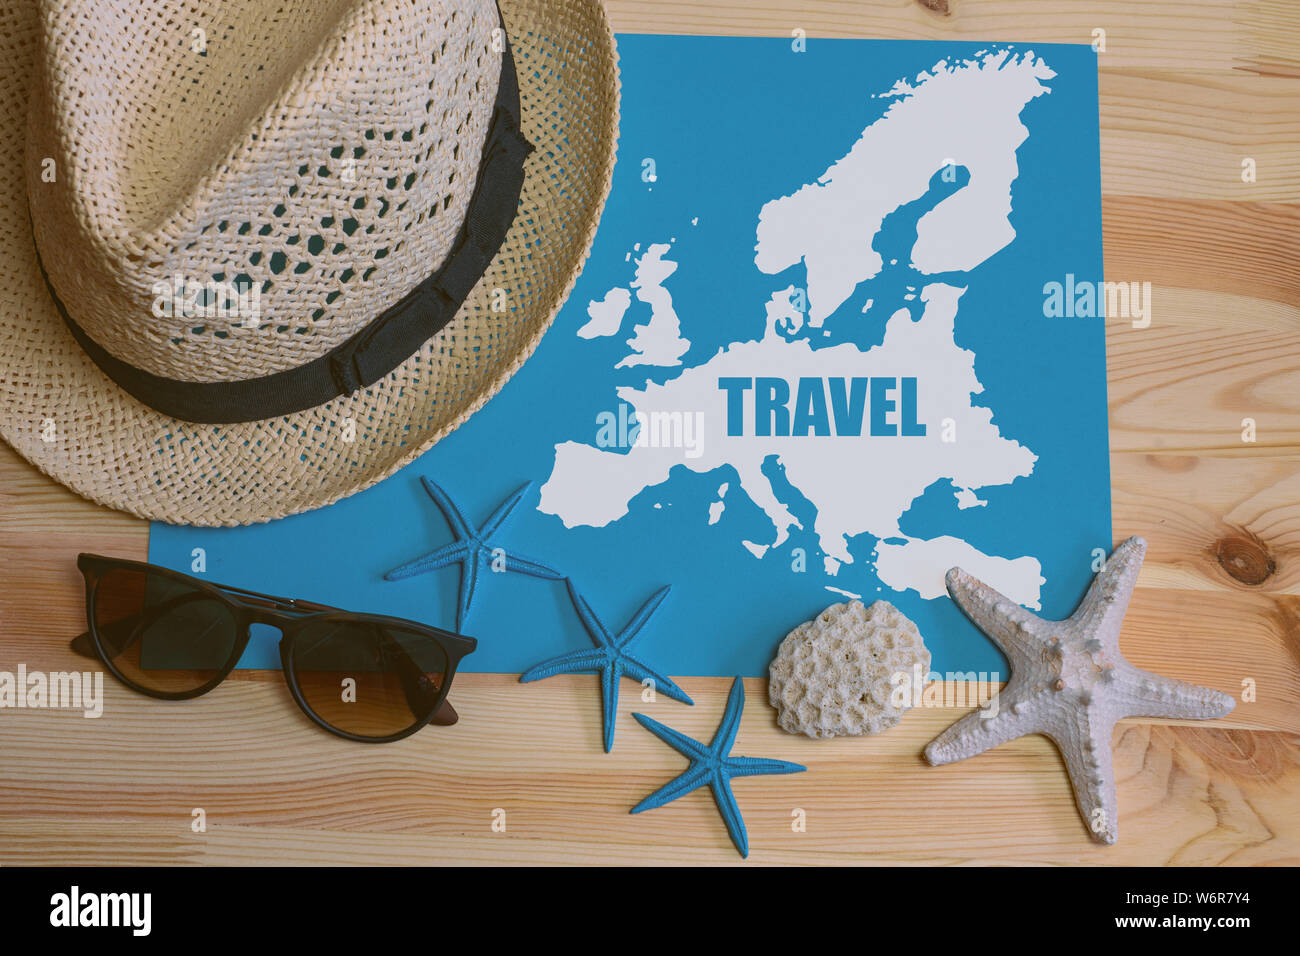 Go travel! Hat sunglasses and europe map with pin a on a wooden table. Top view Stock Photo